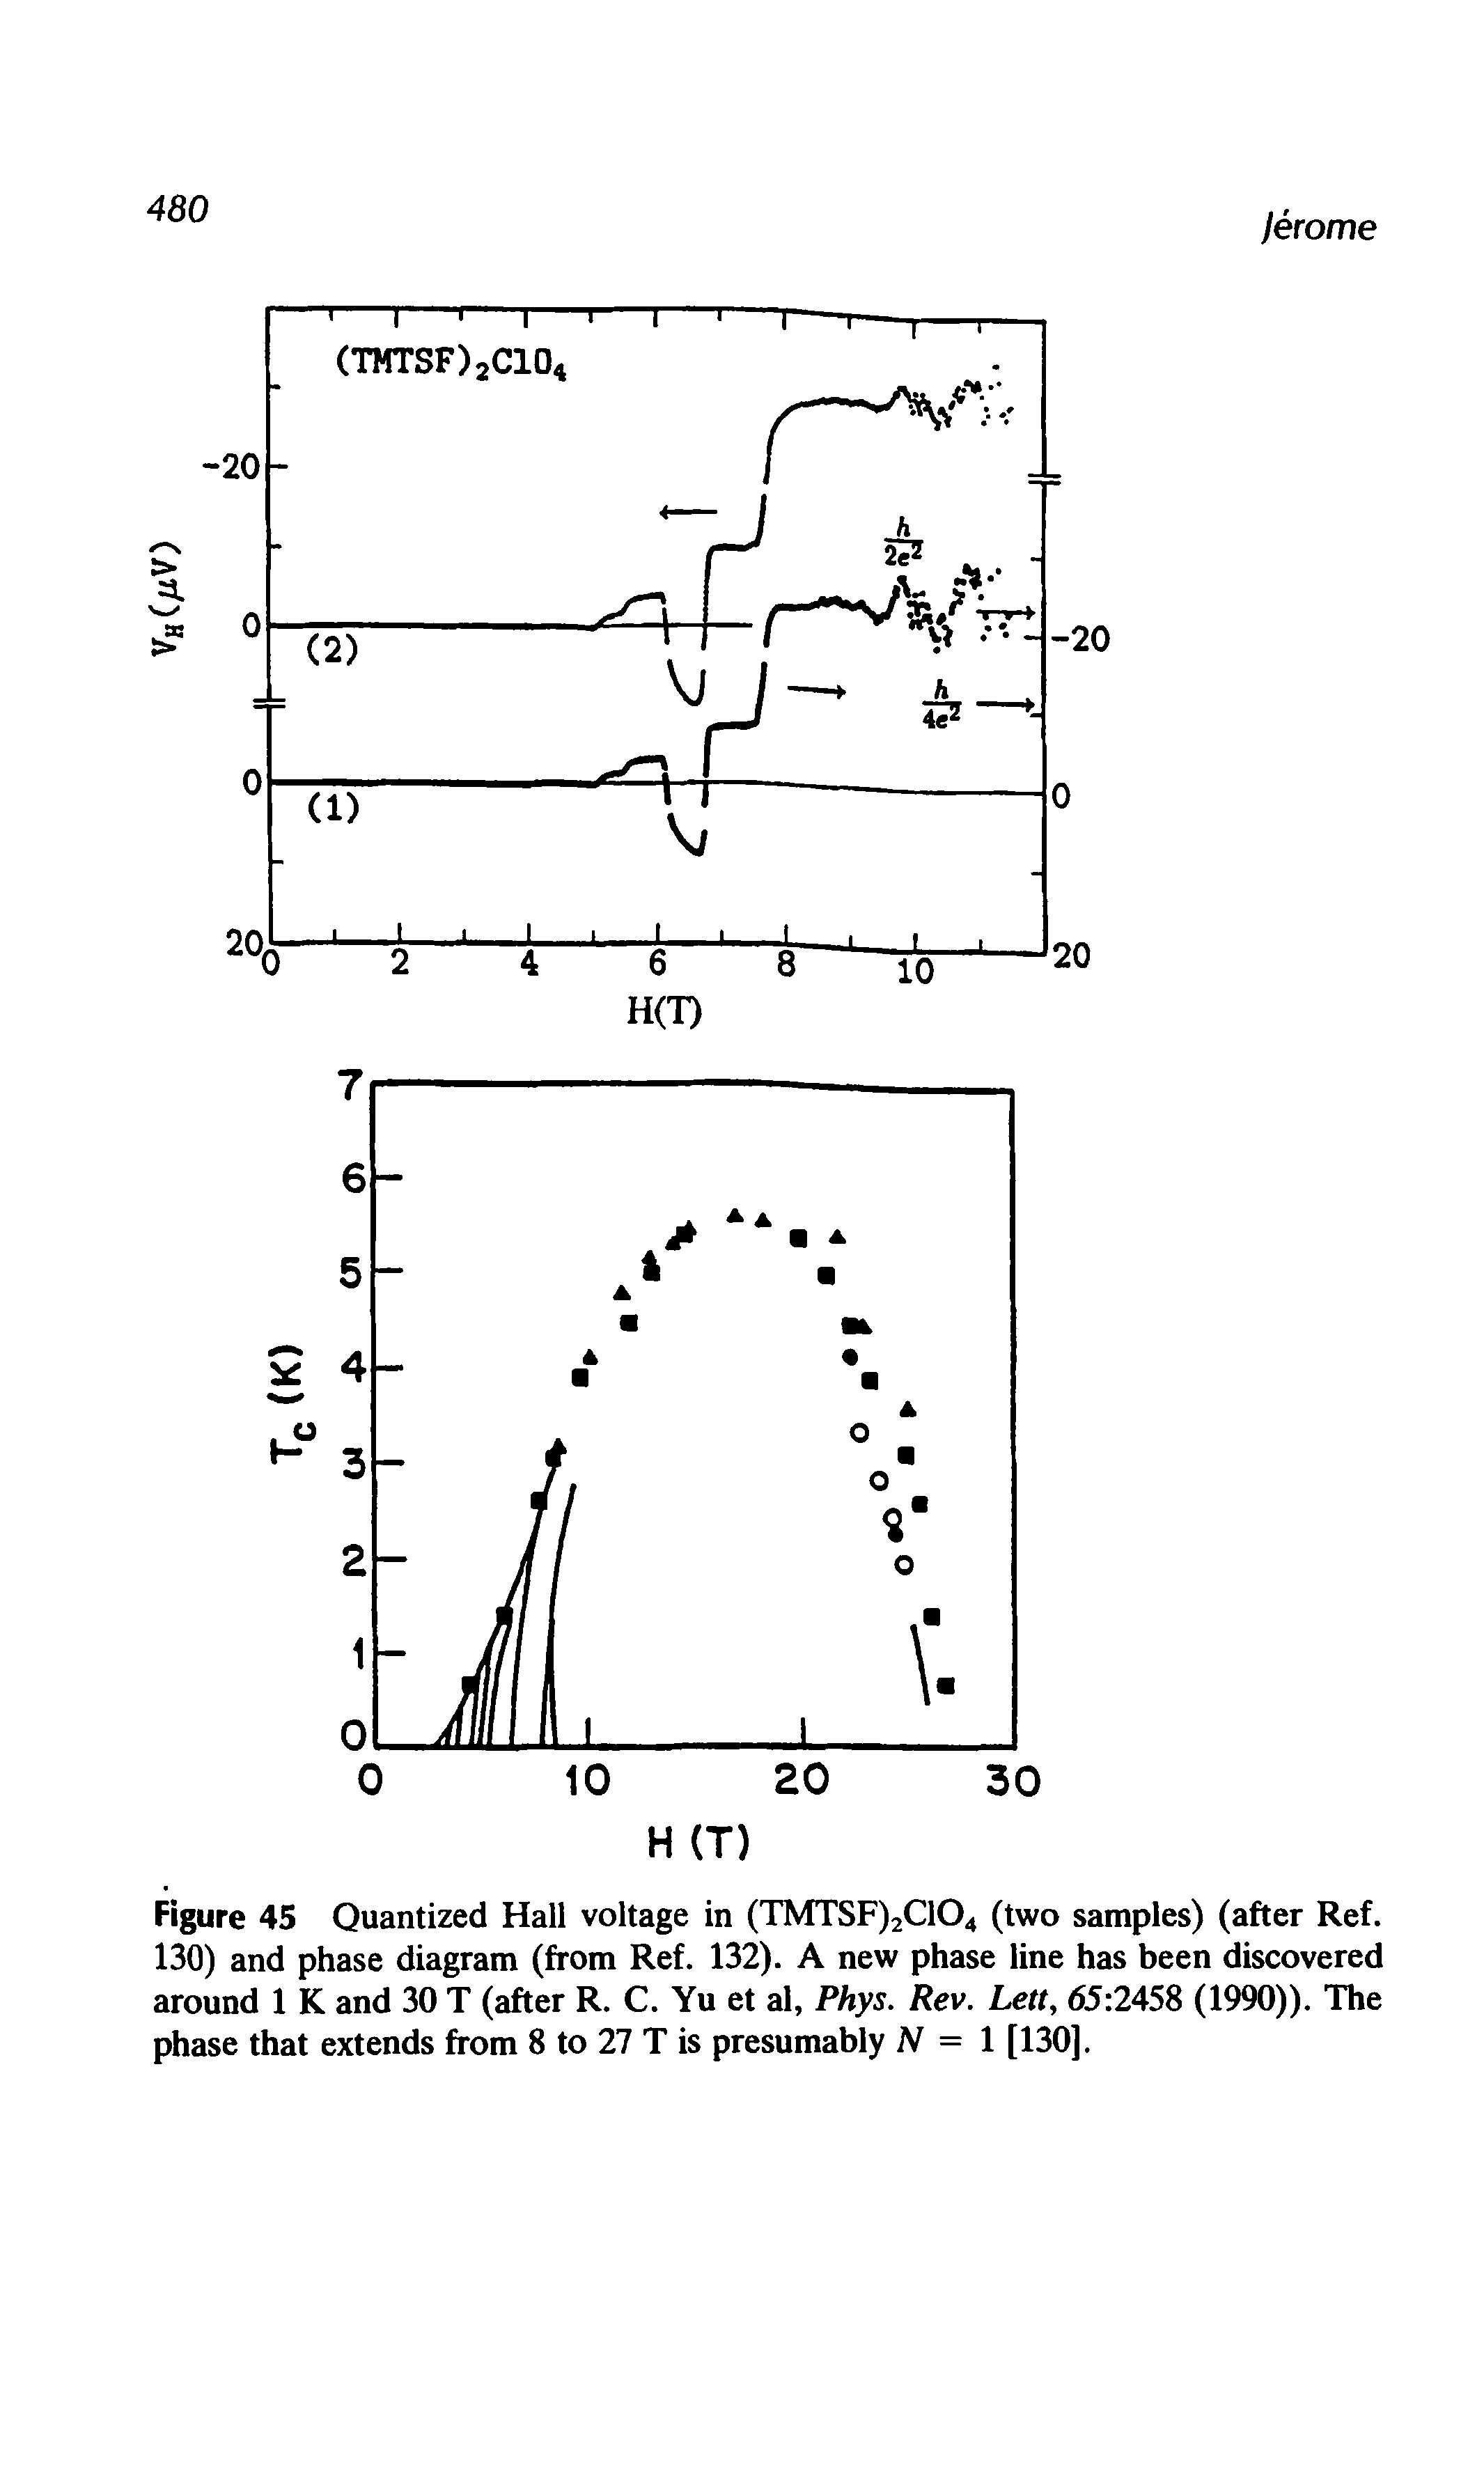 Figure 45 Quantized Hall voltage in (TMTSF)2C104 (two samples) (after Ref. 130) and phase diagram (from Ref. 132). A new phase line has been discovered around 1 K and 30 T (after R. C. Yu et al, Phys. Rev. Lett, 65 2458 (1990)). The phase that extends from 8 to 27 T is presumably N = 1 [130].